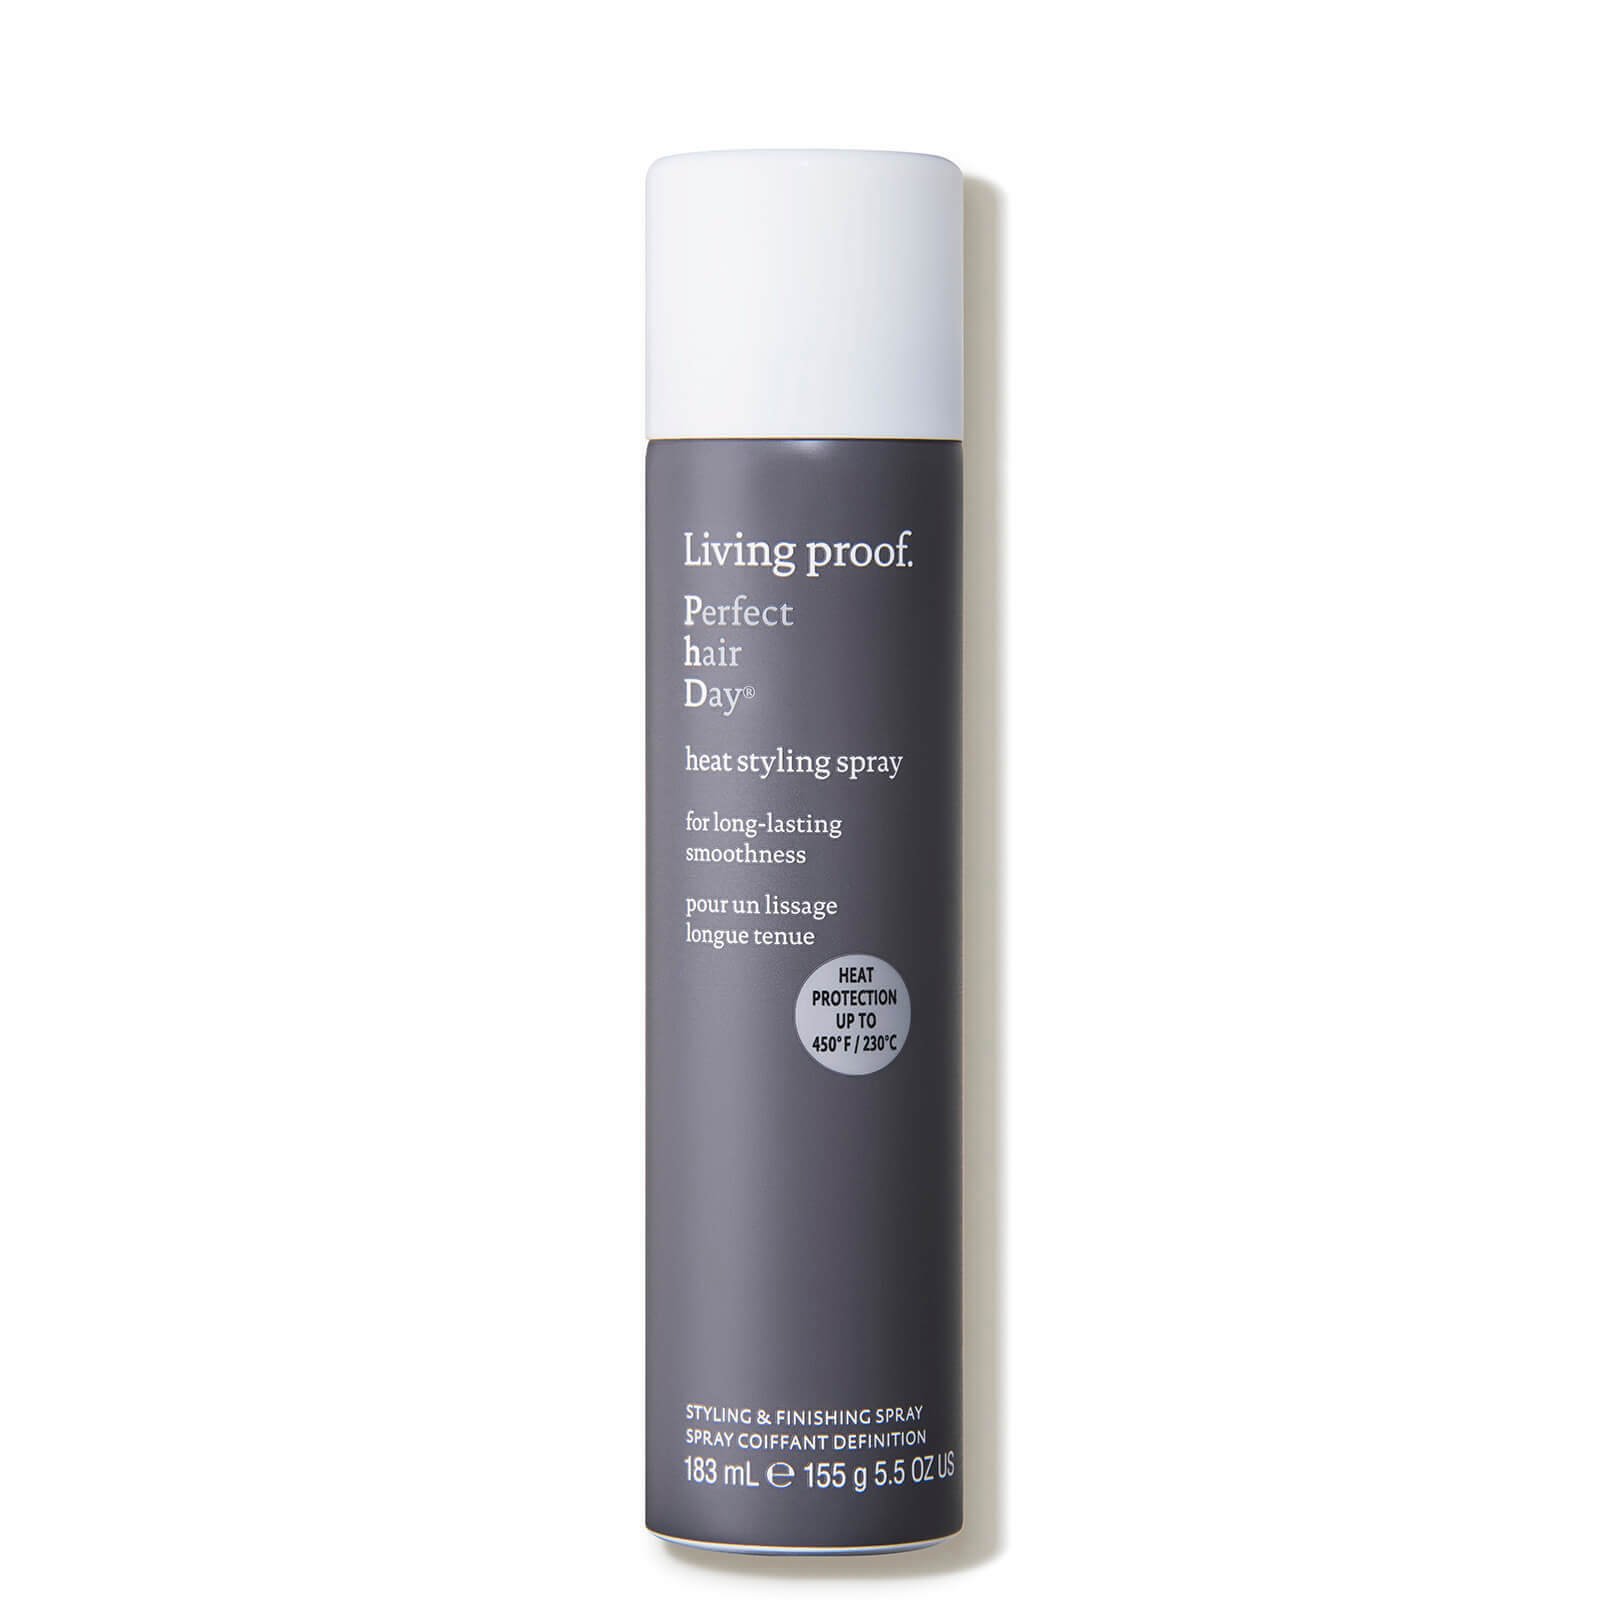 Image of Living Proof Perfect Hair Day Heat Styling Spray 5.5 oz.